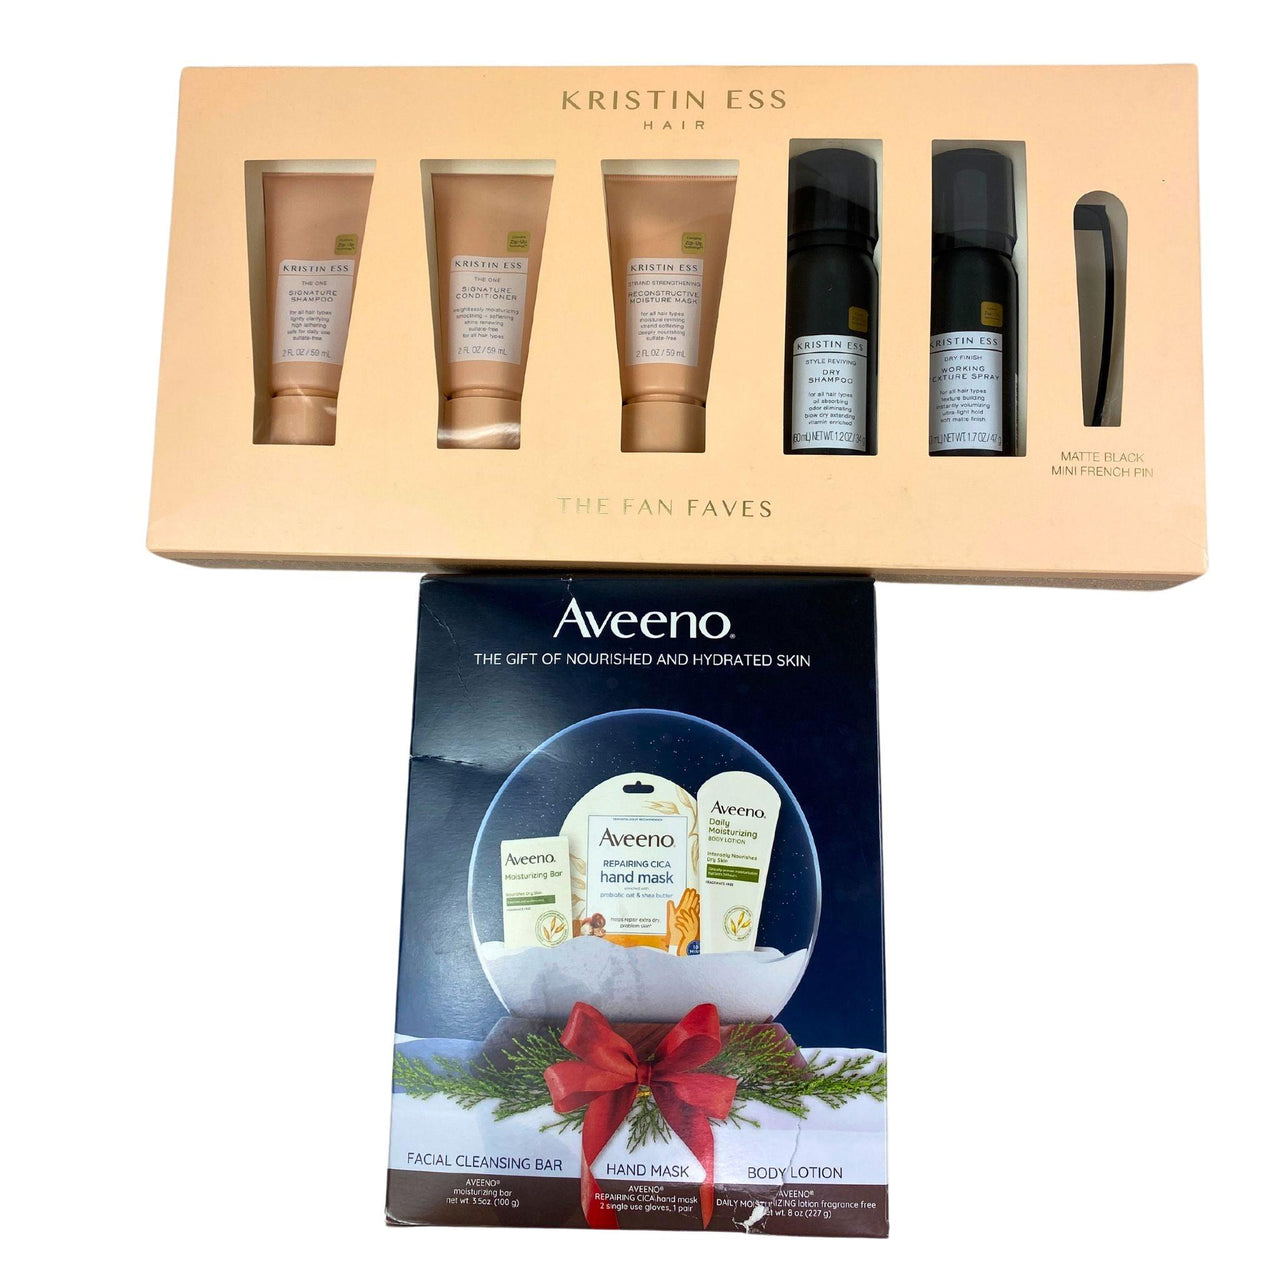 Kristin Ess Hair The Fan Faves & Aveeno The Gift Of Nourished and Hydrated Skin (28 Pcs Lot) - Discount Wholesalers Inc